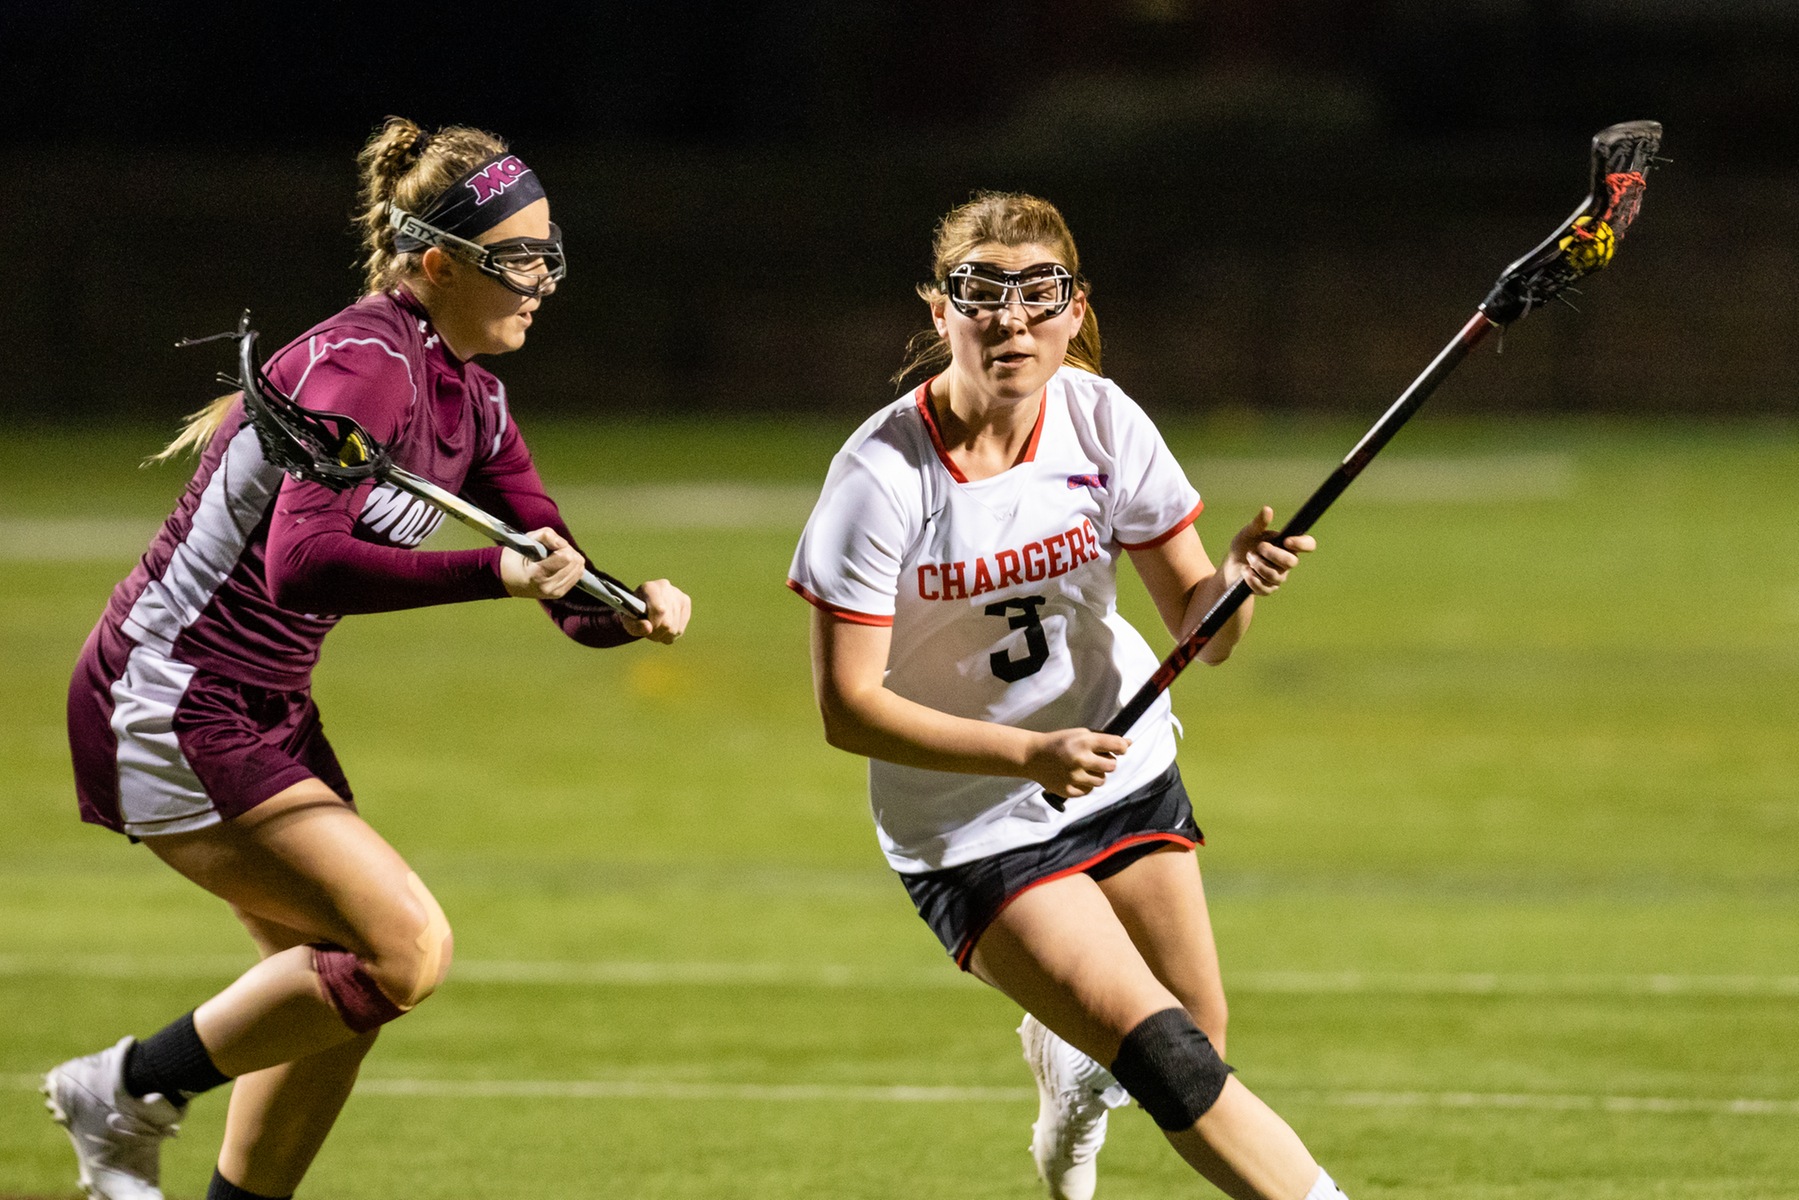 JENNA FOX RECORDS HER 150TH CAREER GOAL AS LADY CHARGERS DROP CONFERENCE FINALE TO JEFFERSON UNIVERSITY